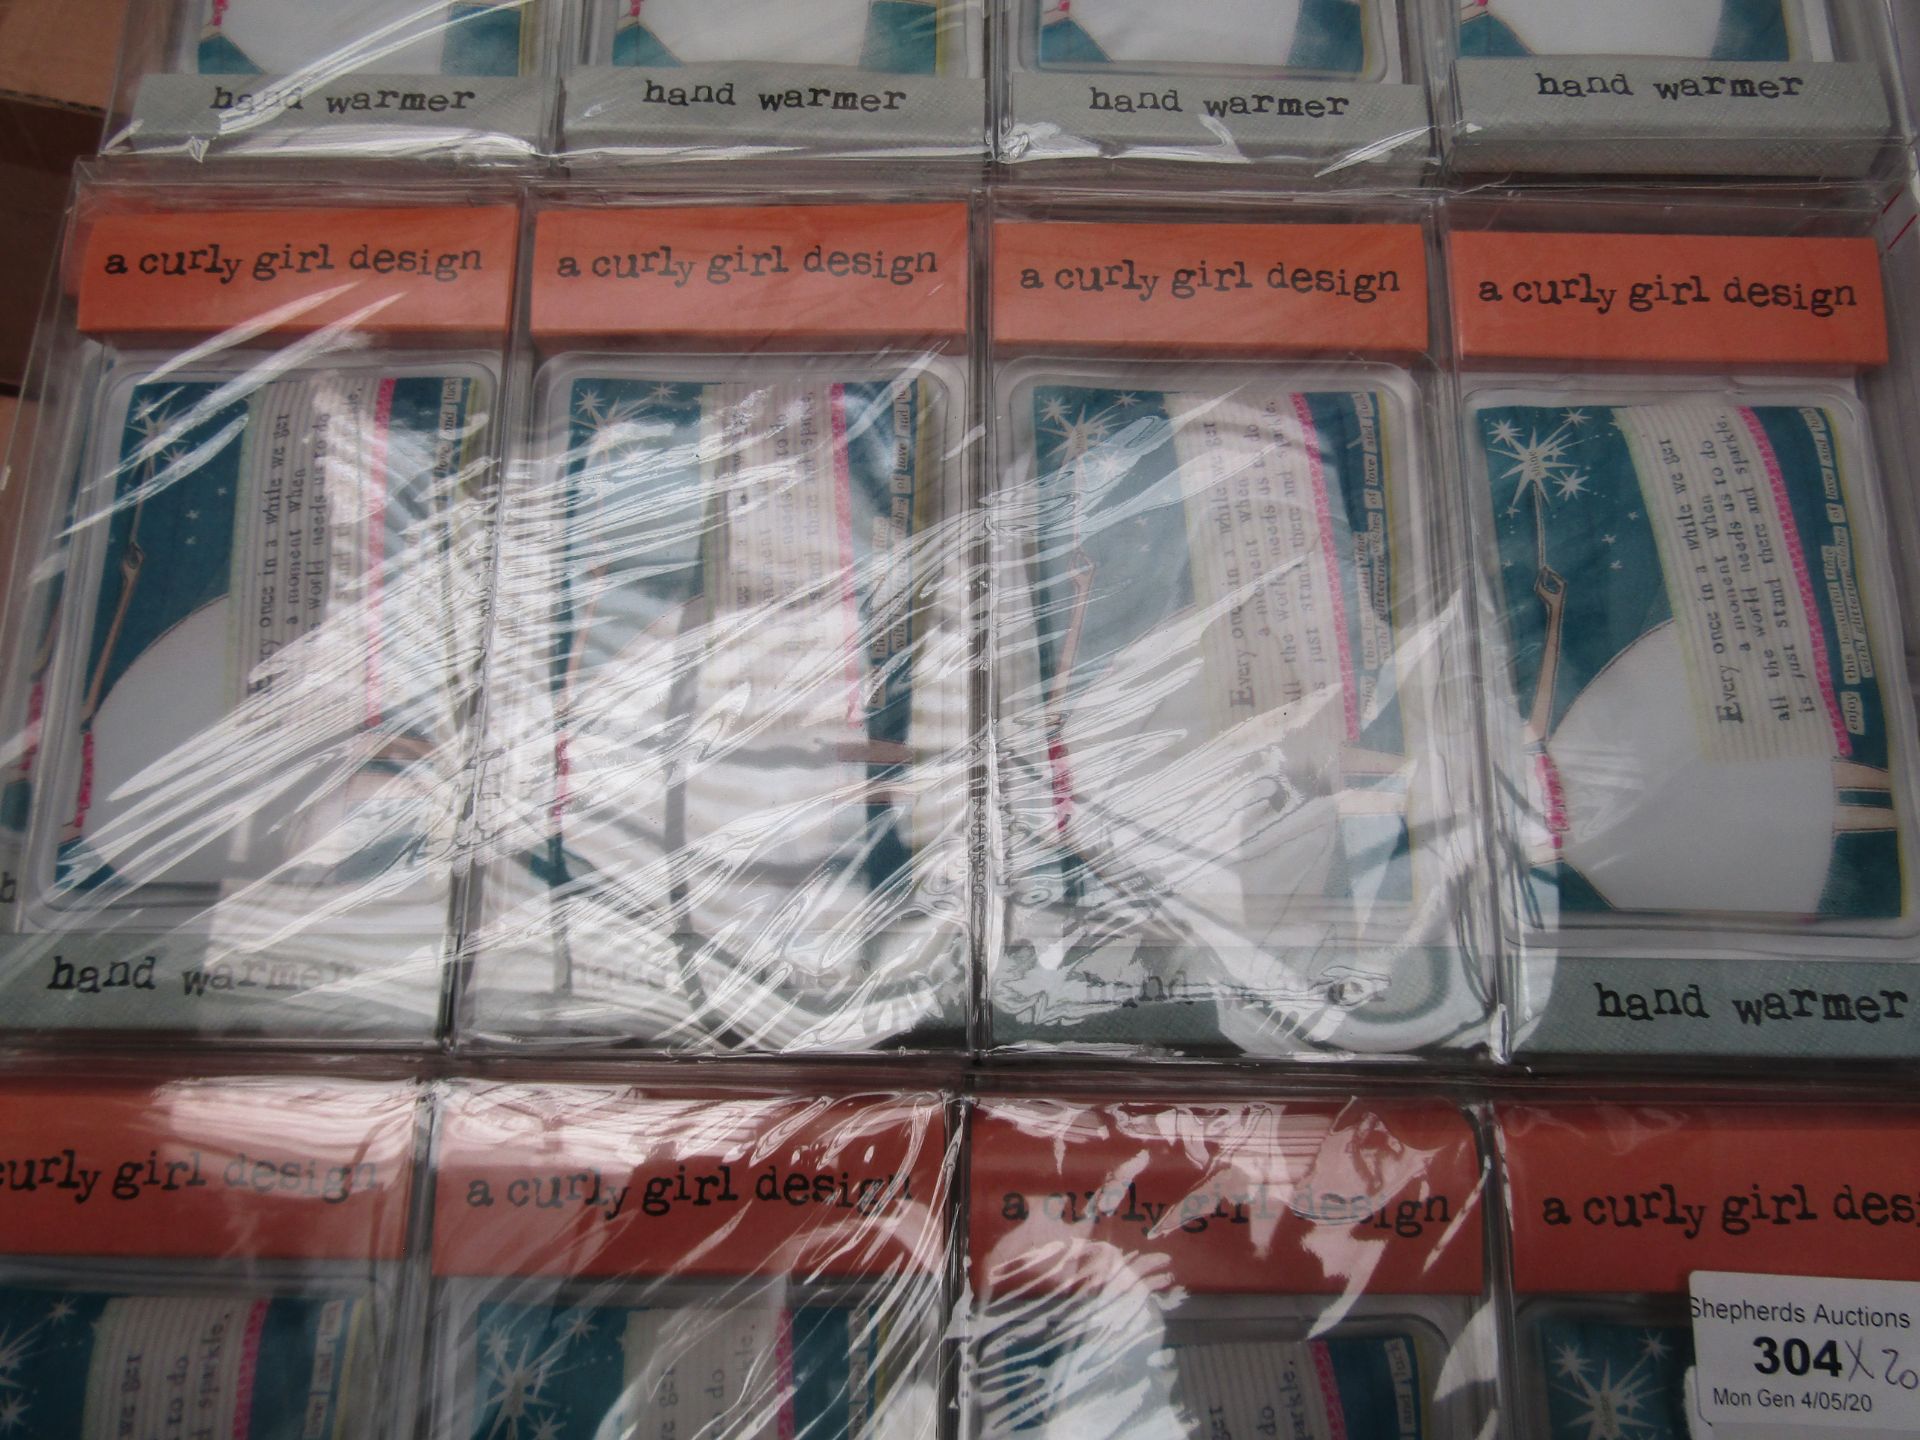 20 x Cirly Girl Hand Warners. New & packaged